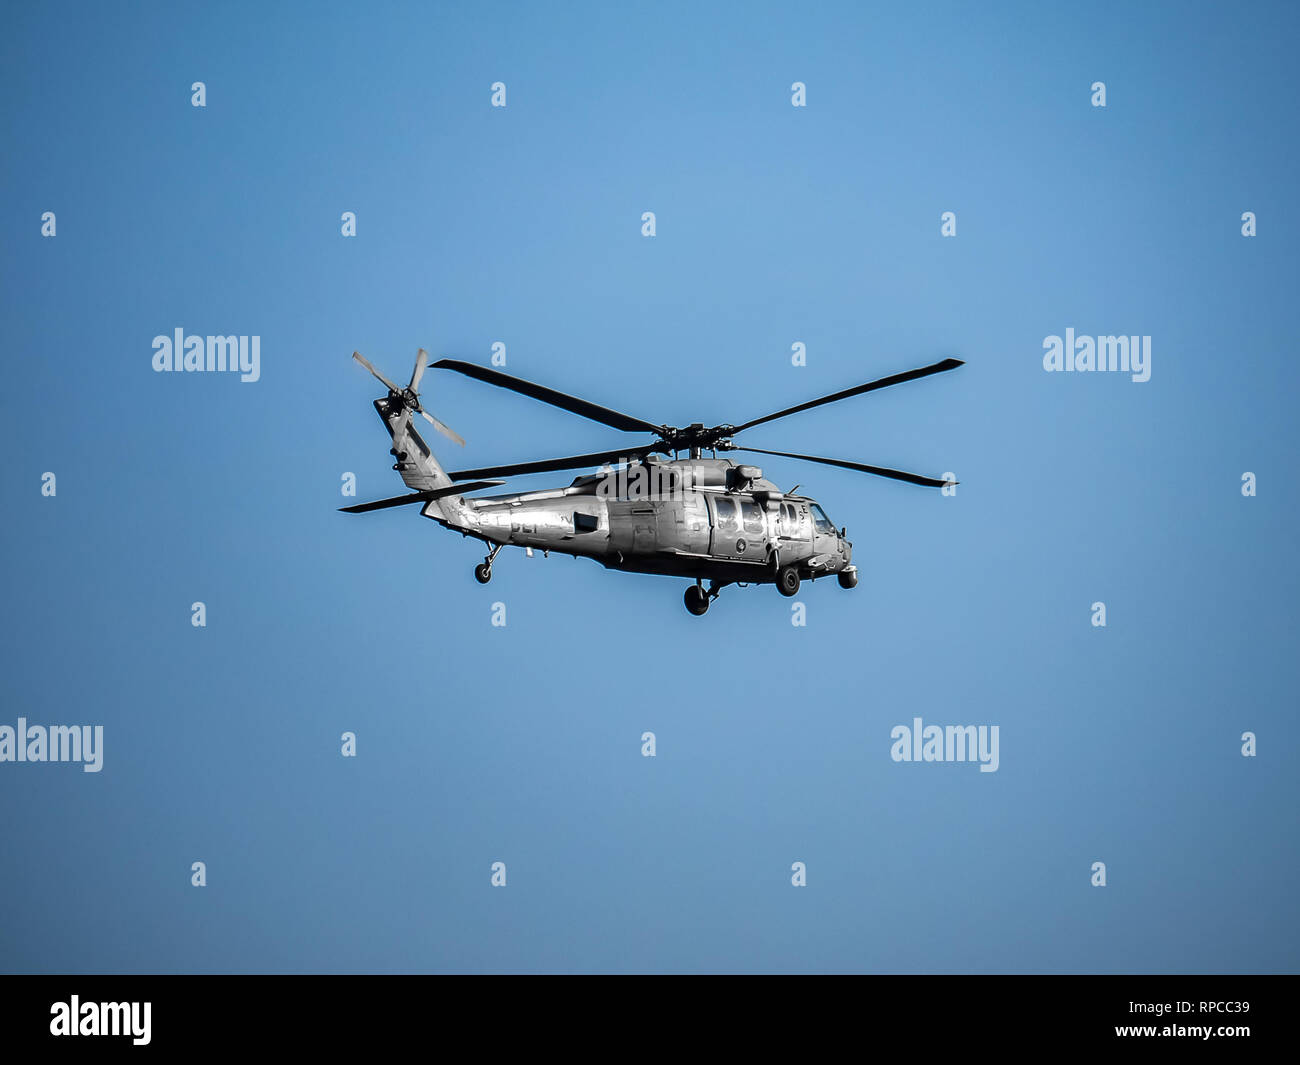 A U.S. Navy SH-60 helicopter flying patrol during flight operations on Naval Air Station Atsugi in Kanagawa, Prefecture Japan. The shared facilities a Stock Photo